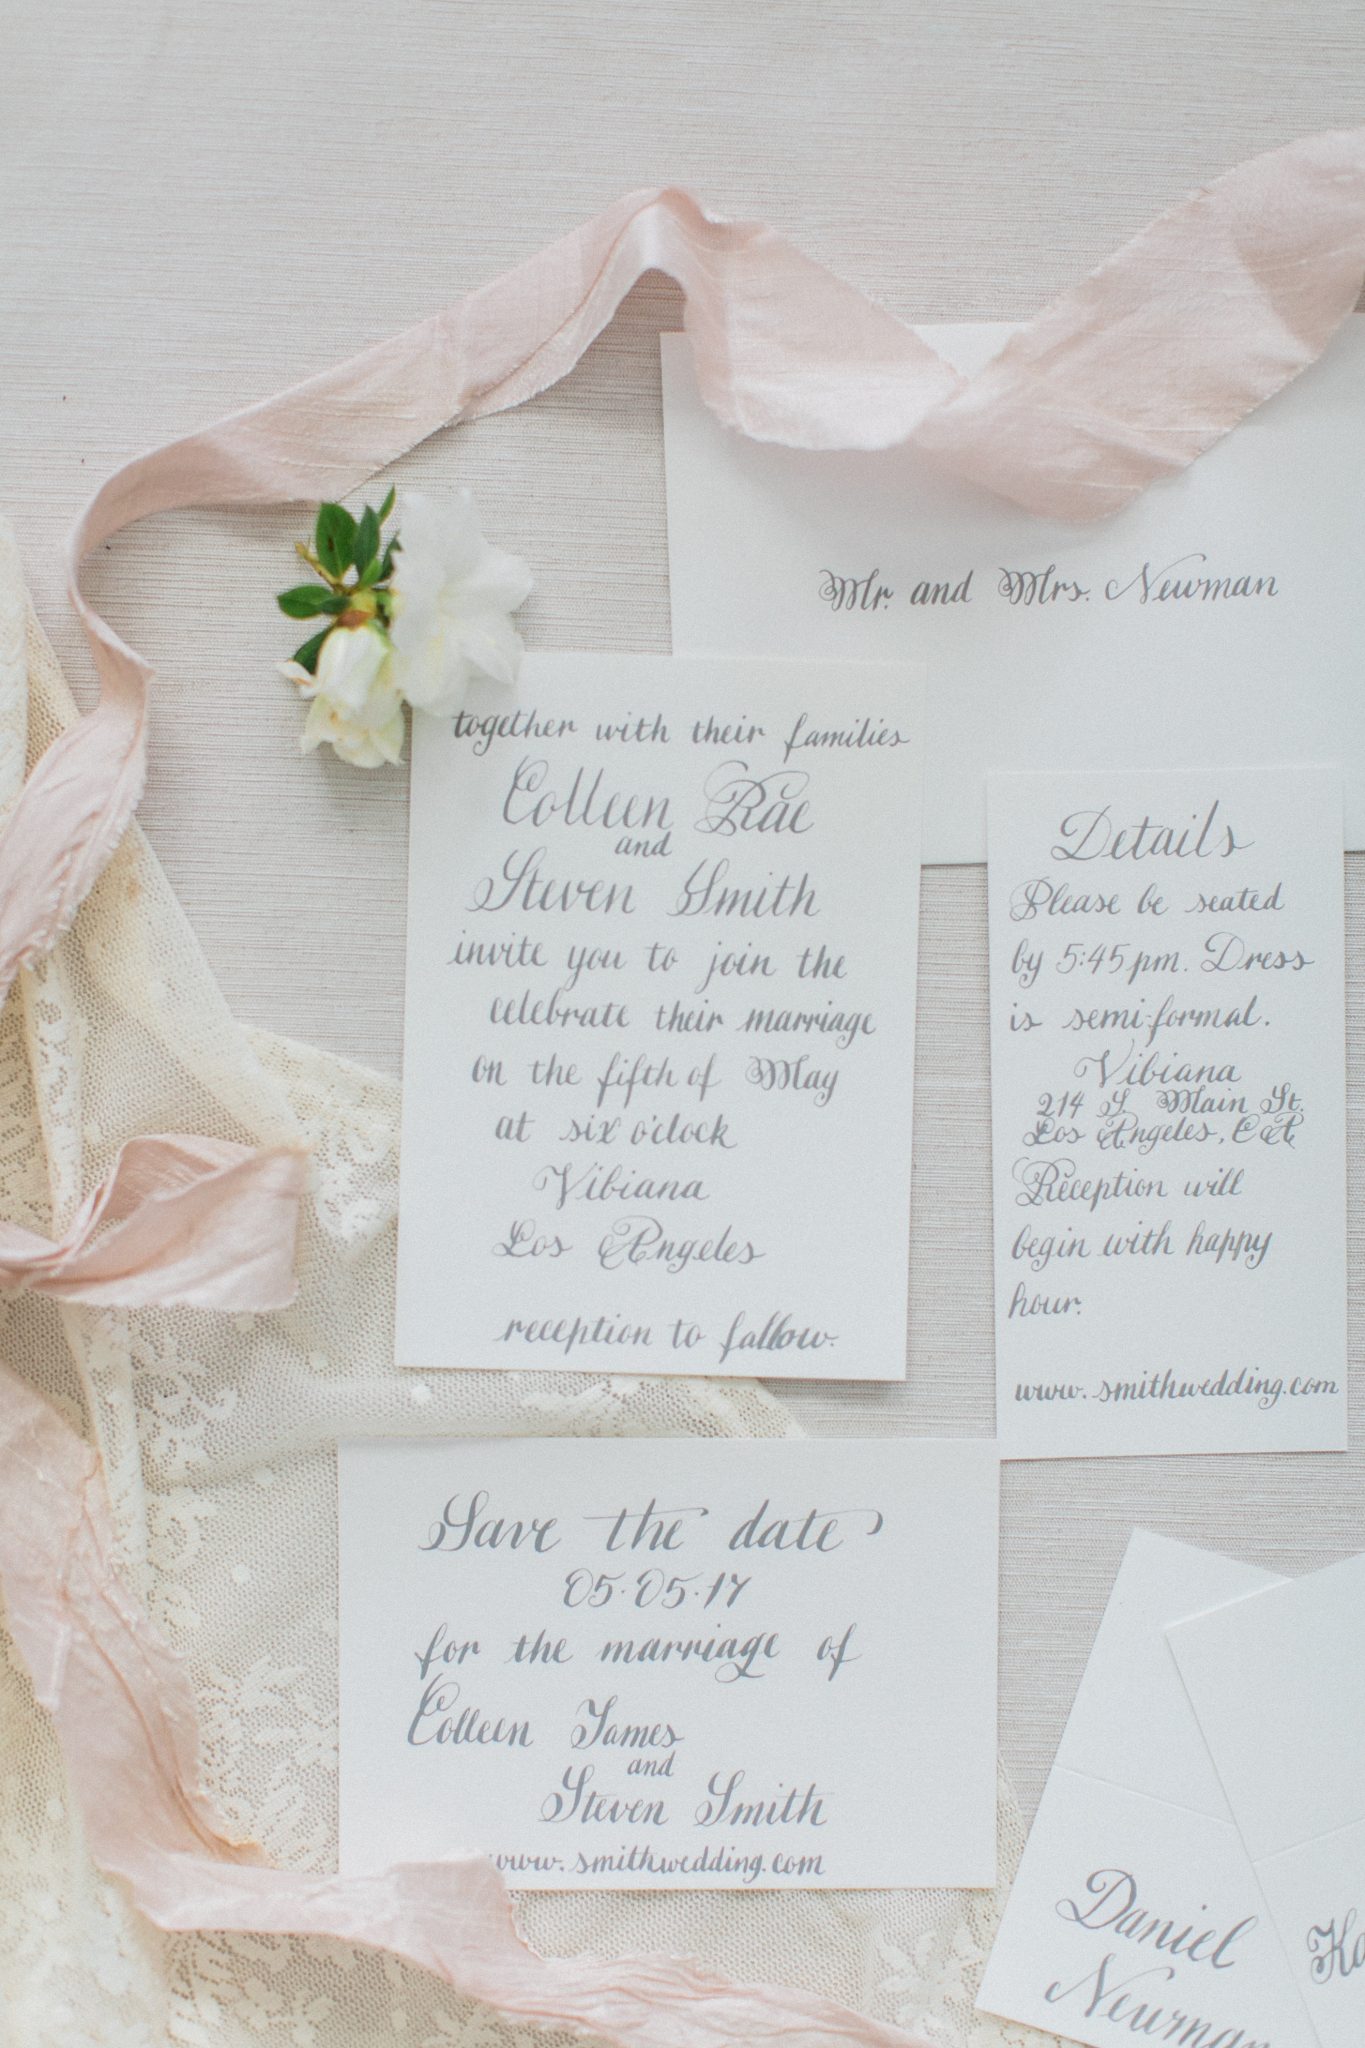 View More: http://sarahbrookephotos.pass.us/invitationsuite